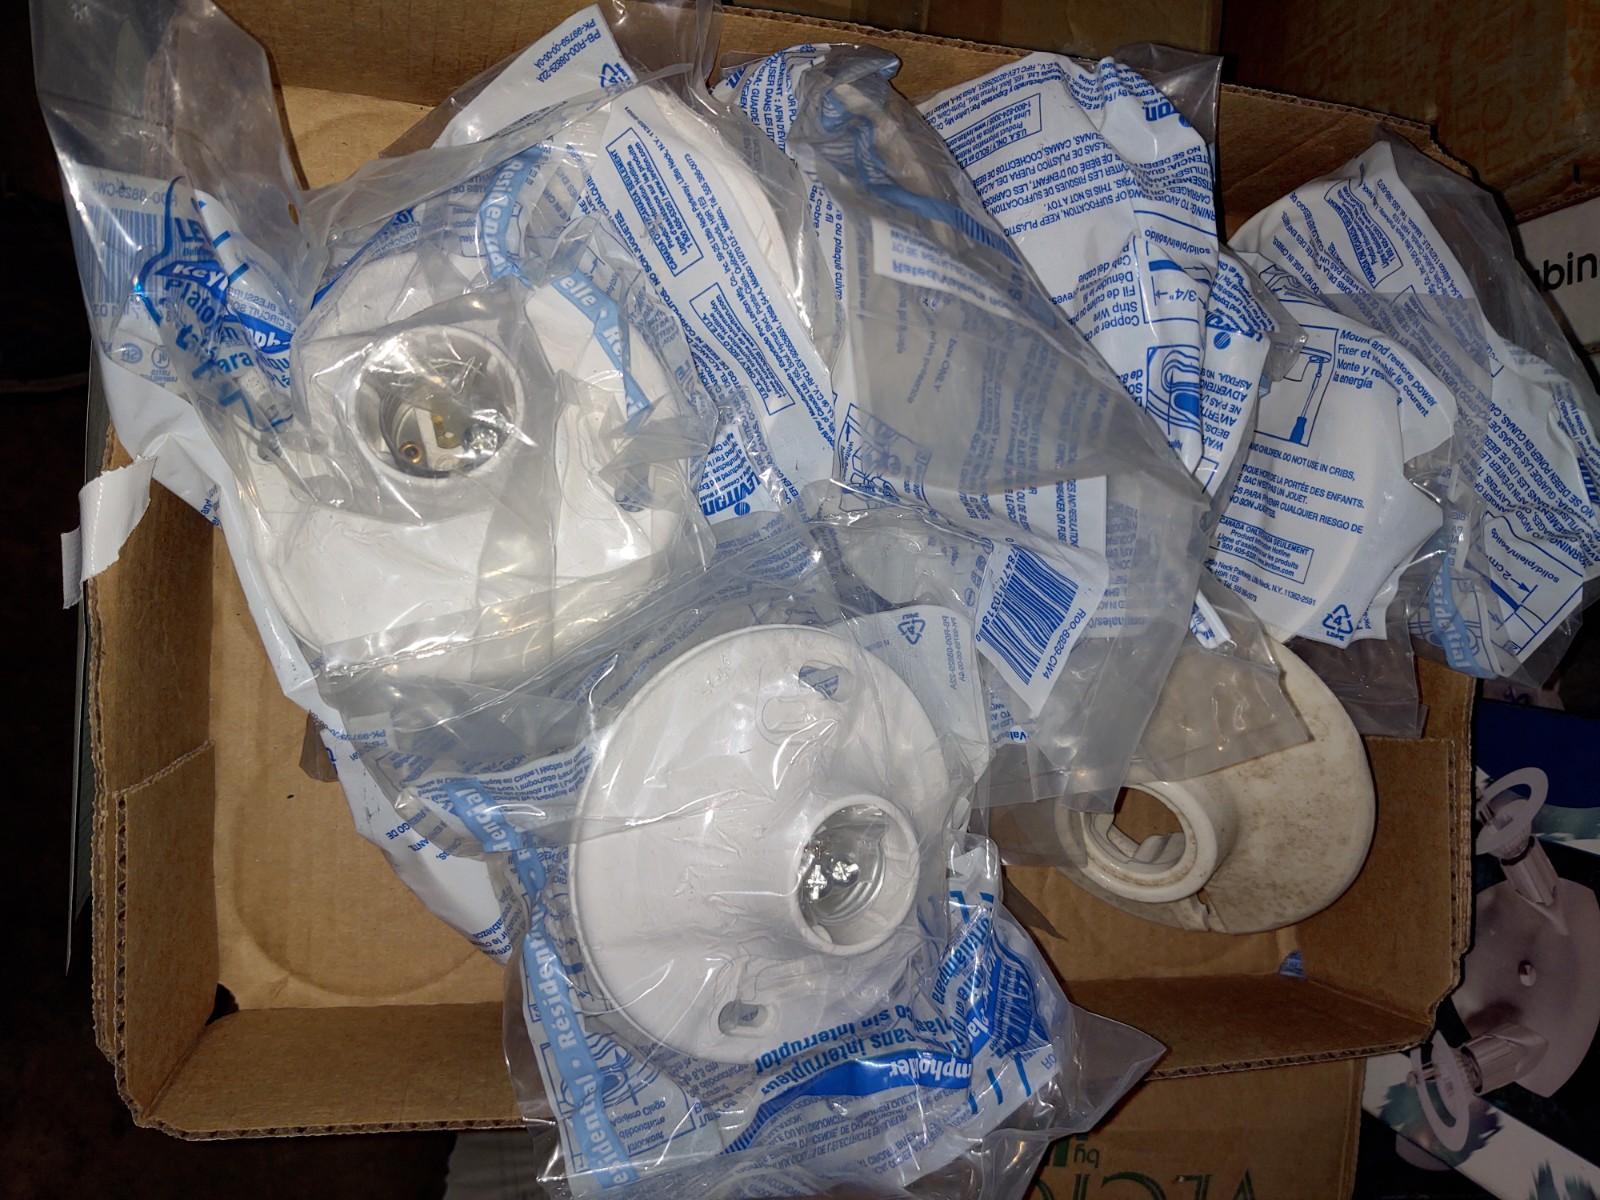 10 LIGHT FIXTURES - PICK UP ONLY